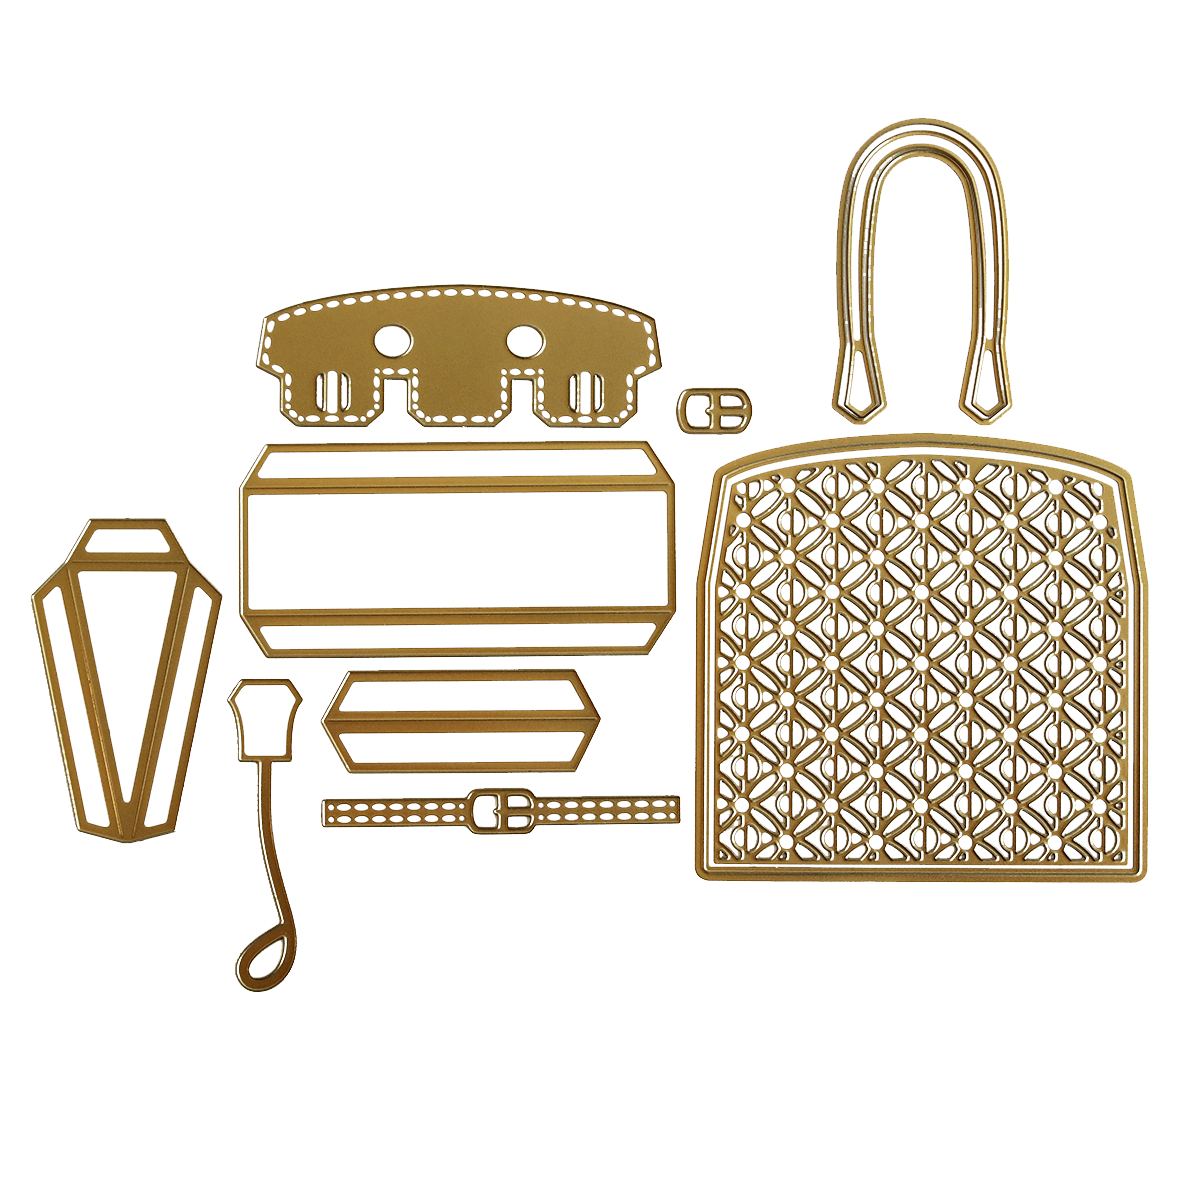 Ladies Handbags Clipart for Commercial Use, Digital Clipart, Png Images -  Etsy